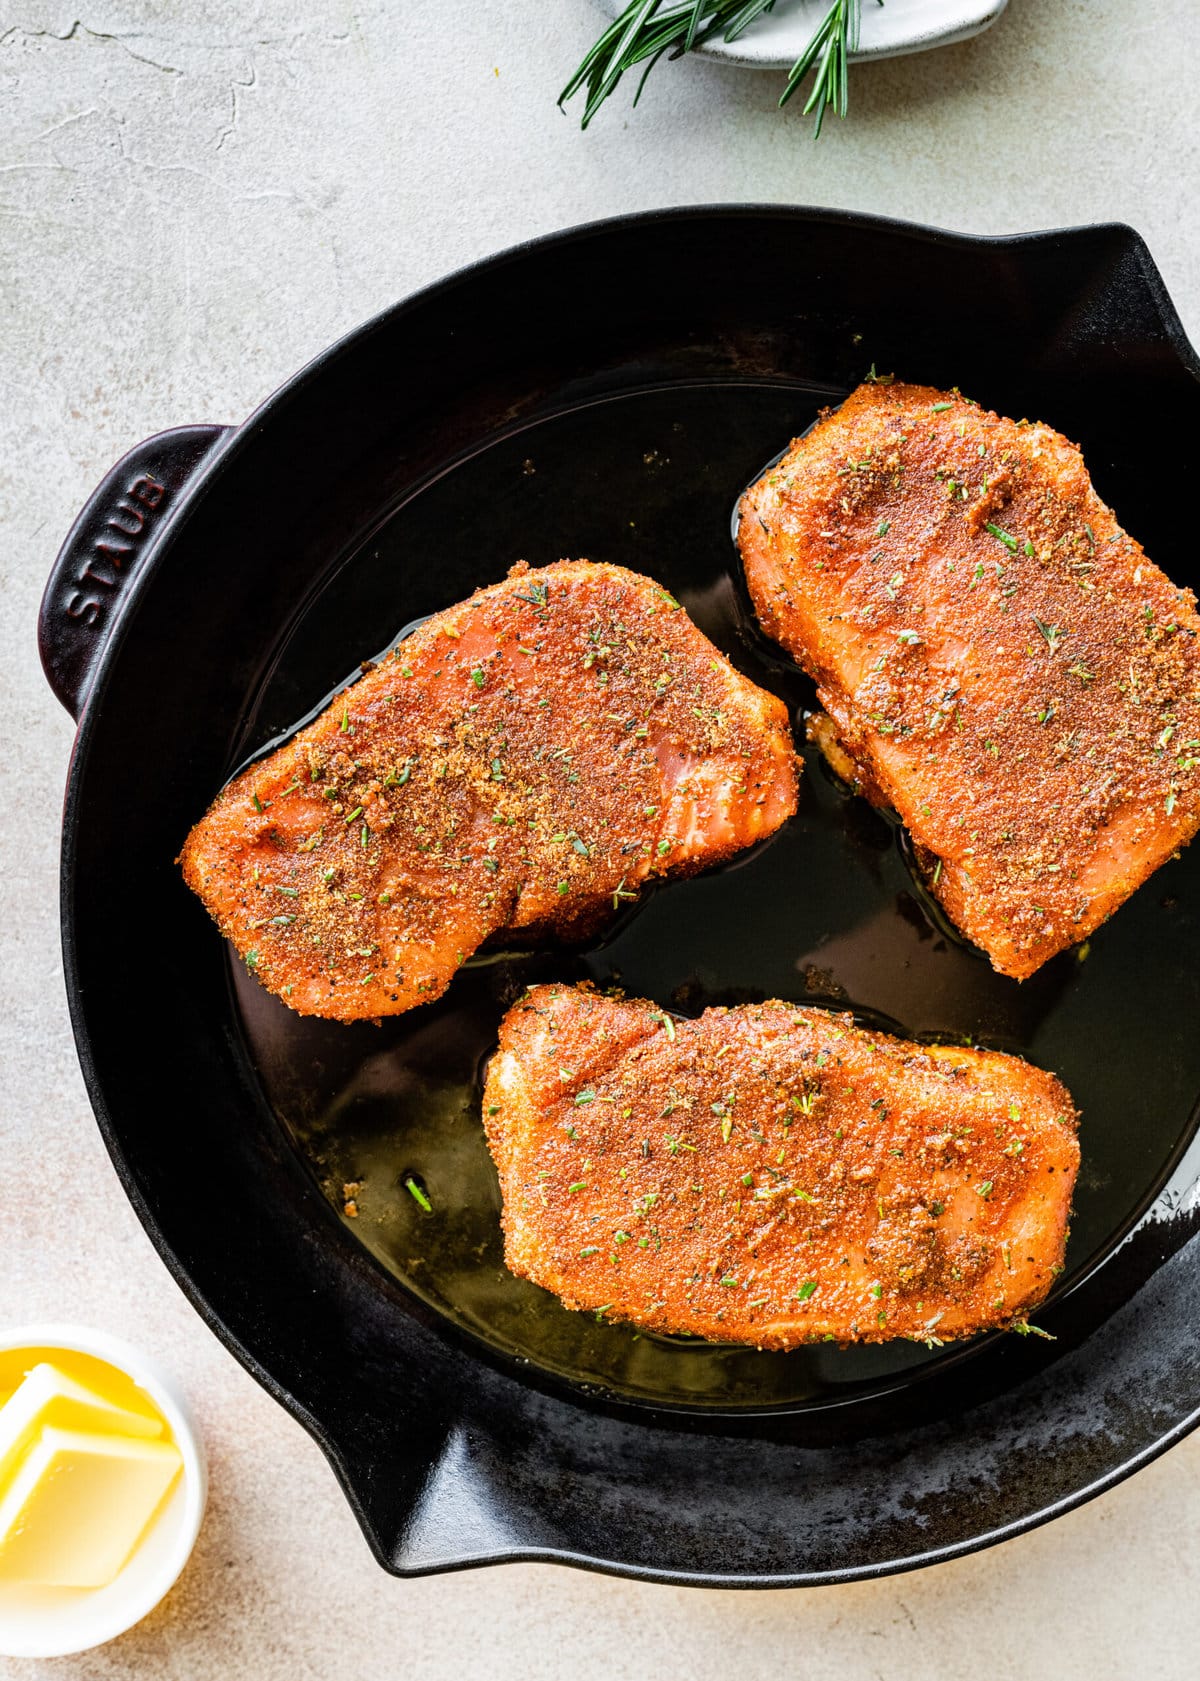 Step-by-step photos for How to cook thick pork chops- adding pork chops to hot skillet with oil.